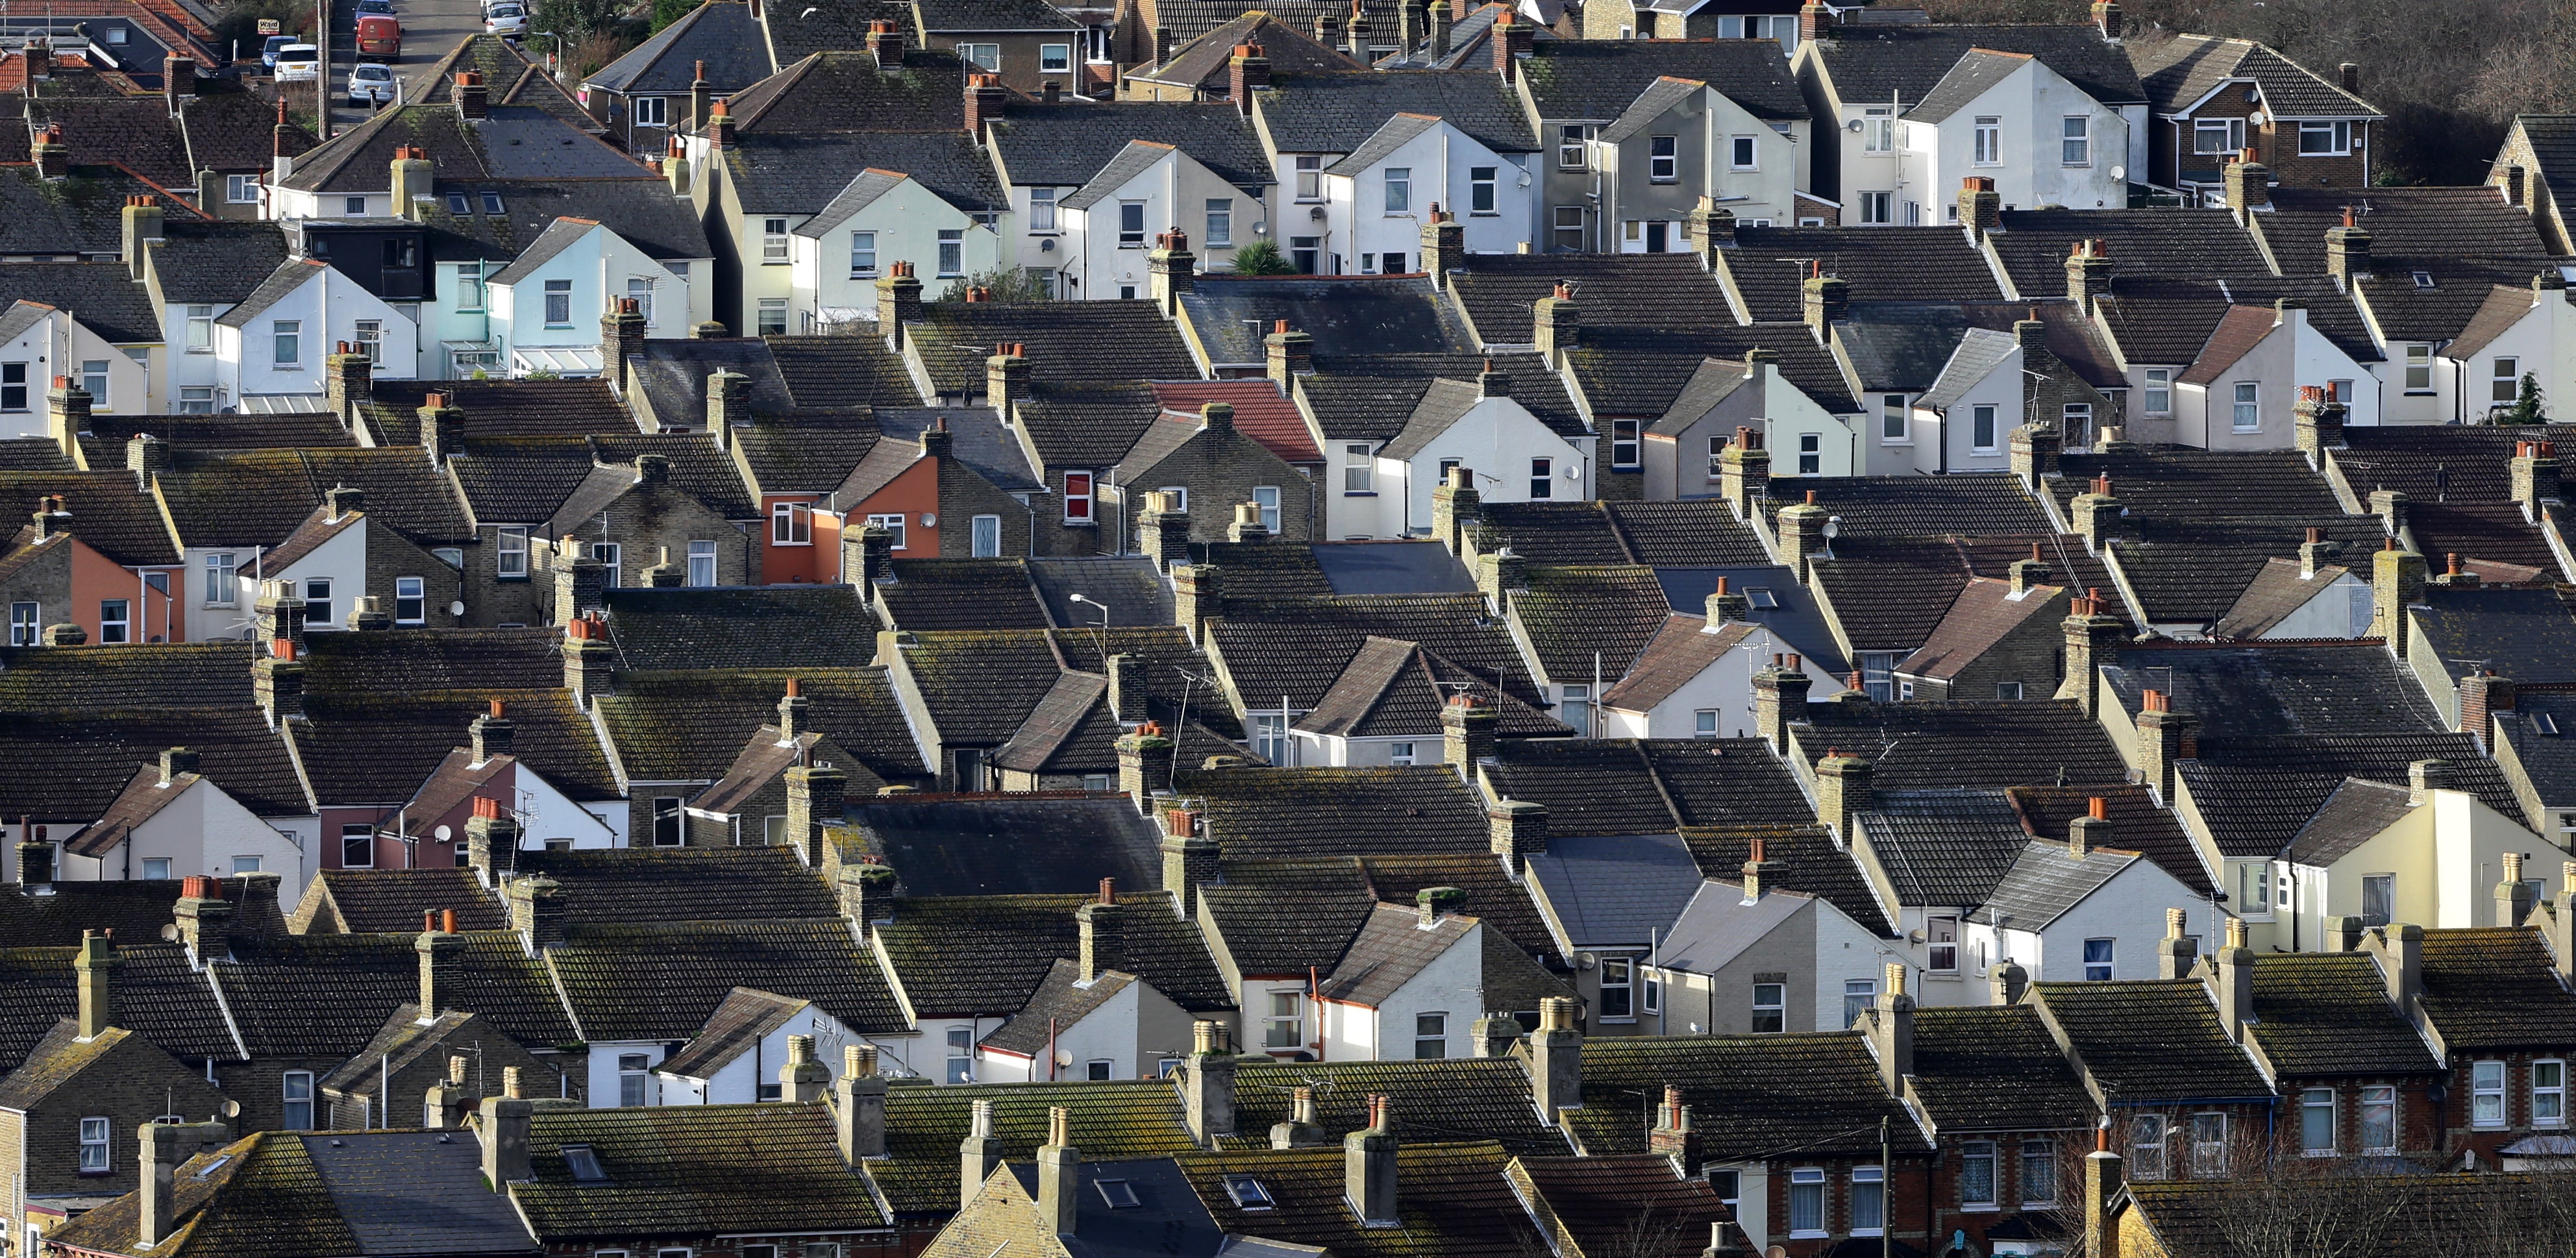 Annual house price growth hit 10 per cent in November, according to Nationwide Building Society (Gareth Fuller/PA)